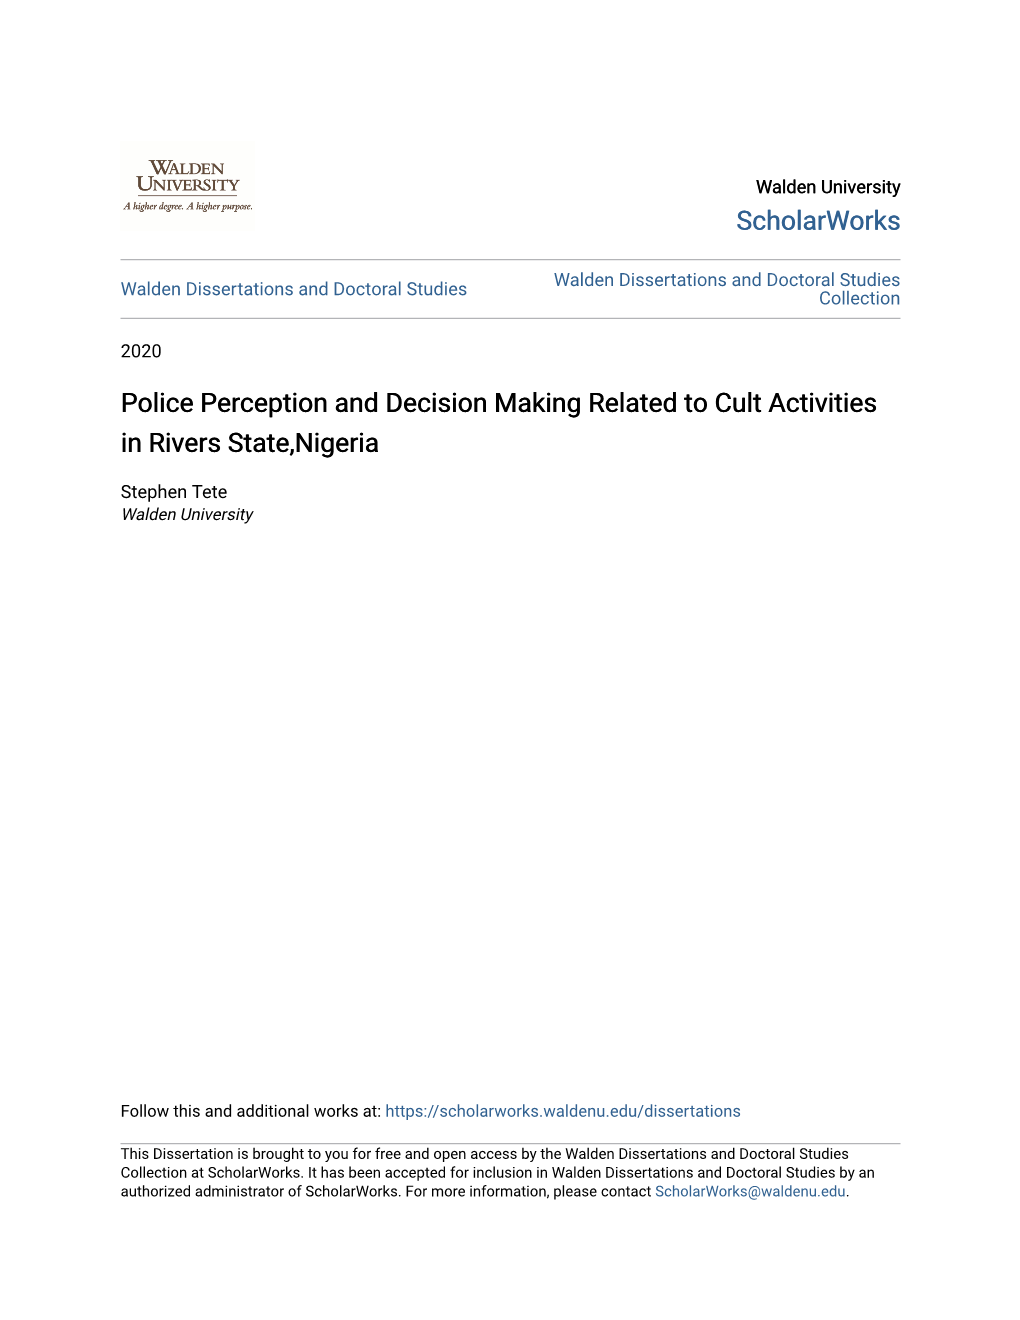 Police Perception and Decision Making Related to Cult Activities in Rivers State,Nigeria